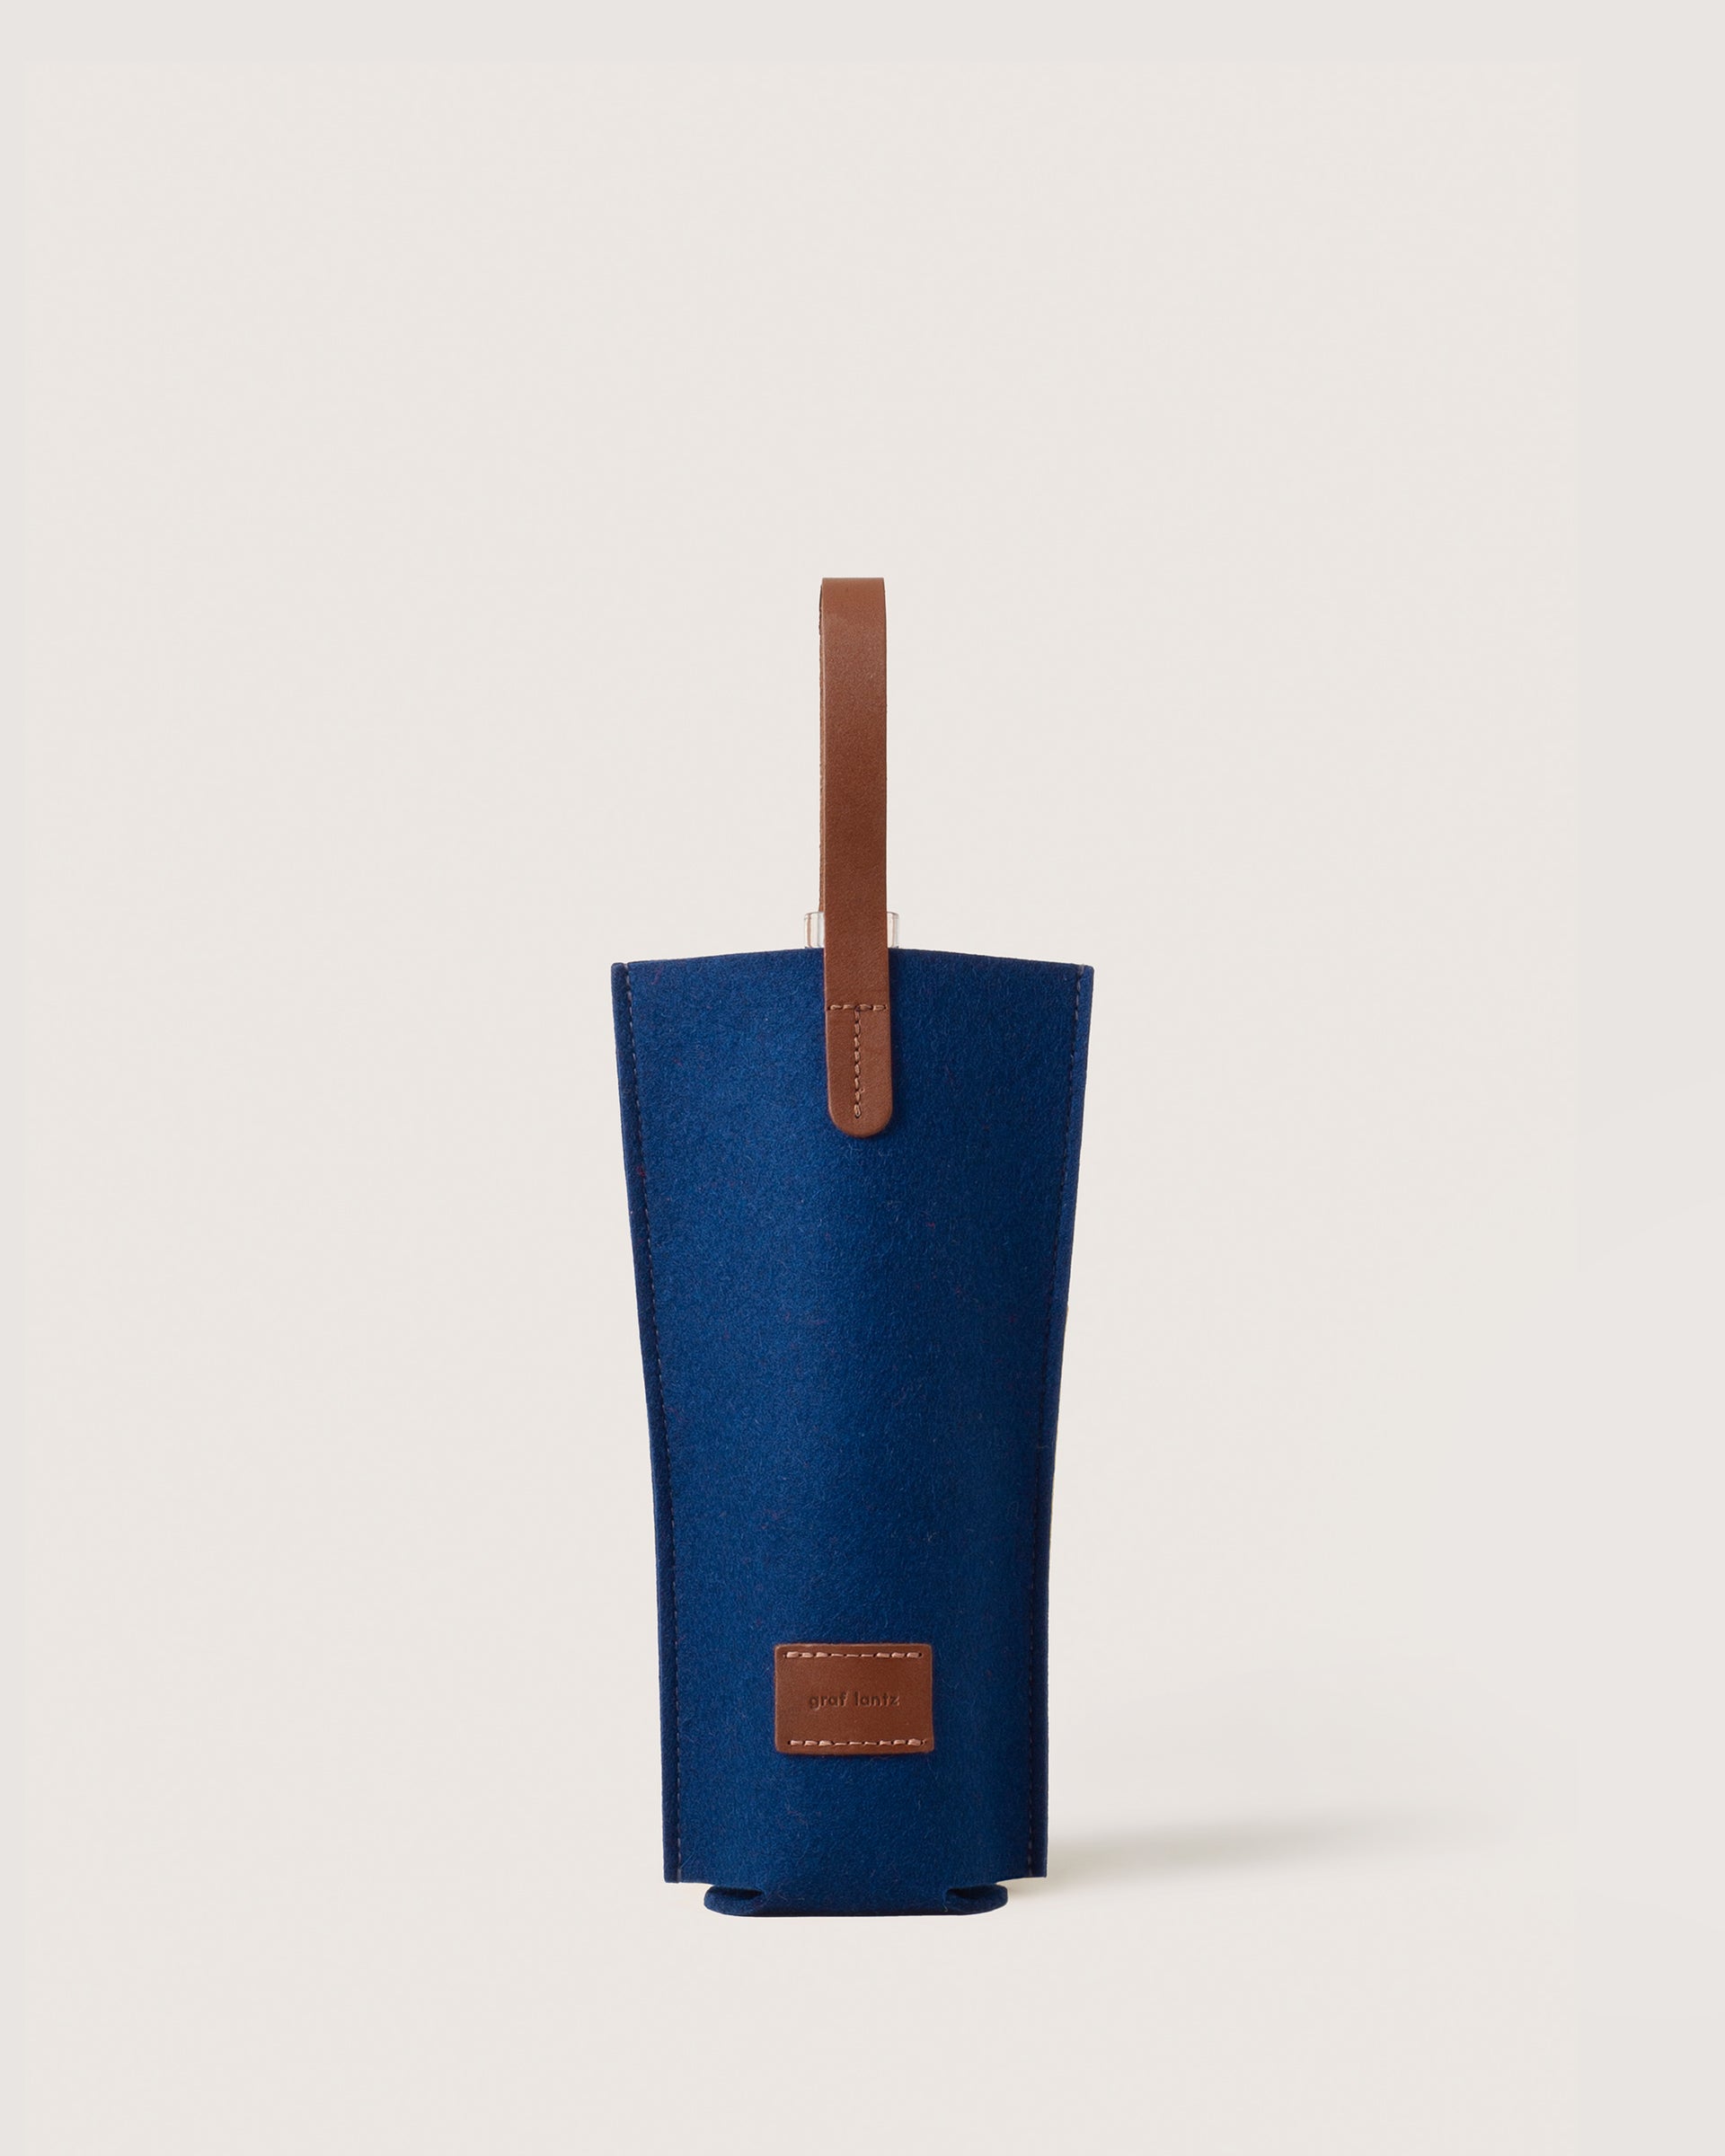 A Merino Wool Felt Single Wine Carrier in color Marine Sienna with a brown leather handle, white background